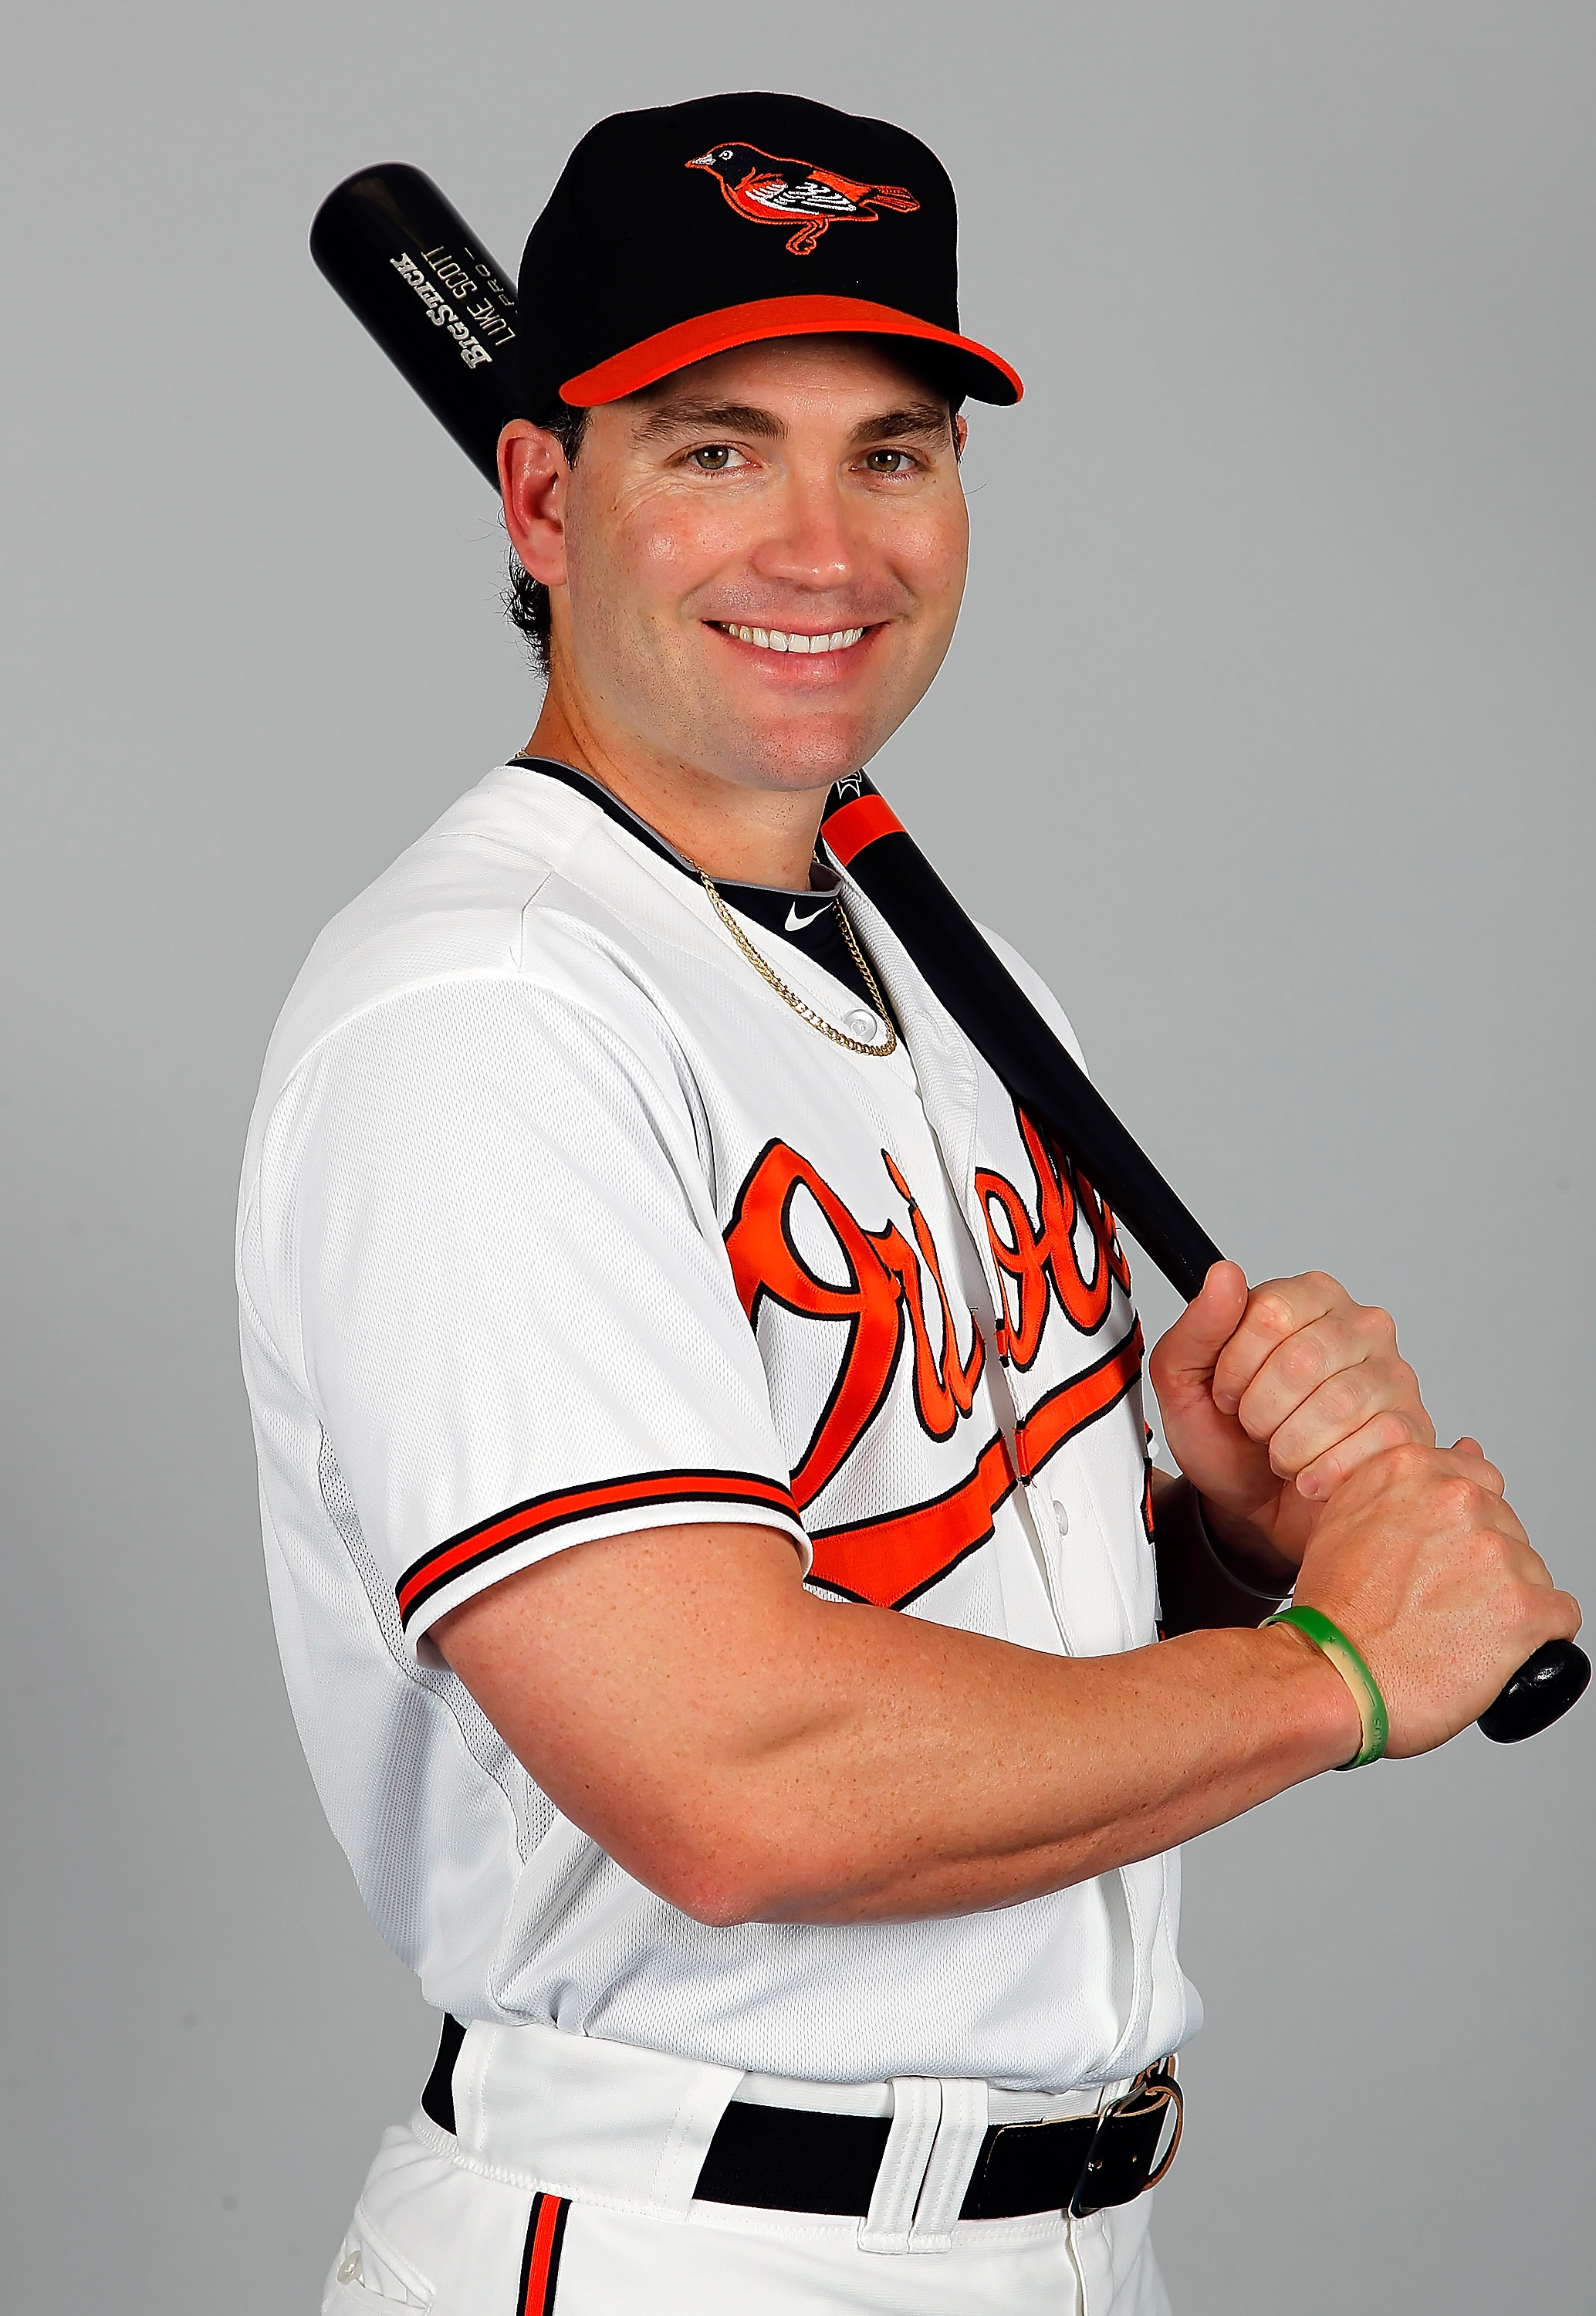 SARASOTA, FL - FEBRUARY 26:  Outfielder Luke Scott #30 of the Baltimore Orioles poses for a photo during photo day at Ed Smith Stadium on February 26, 2011 in Sarasota, Florida.  (Photo by J. Meric/Getty Images)